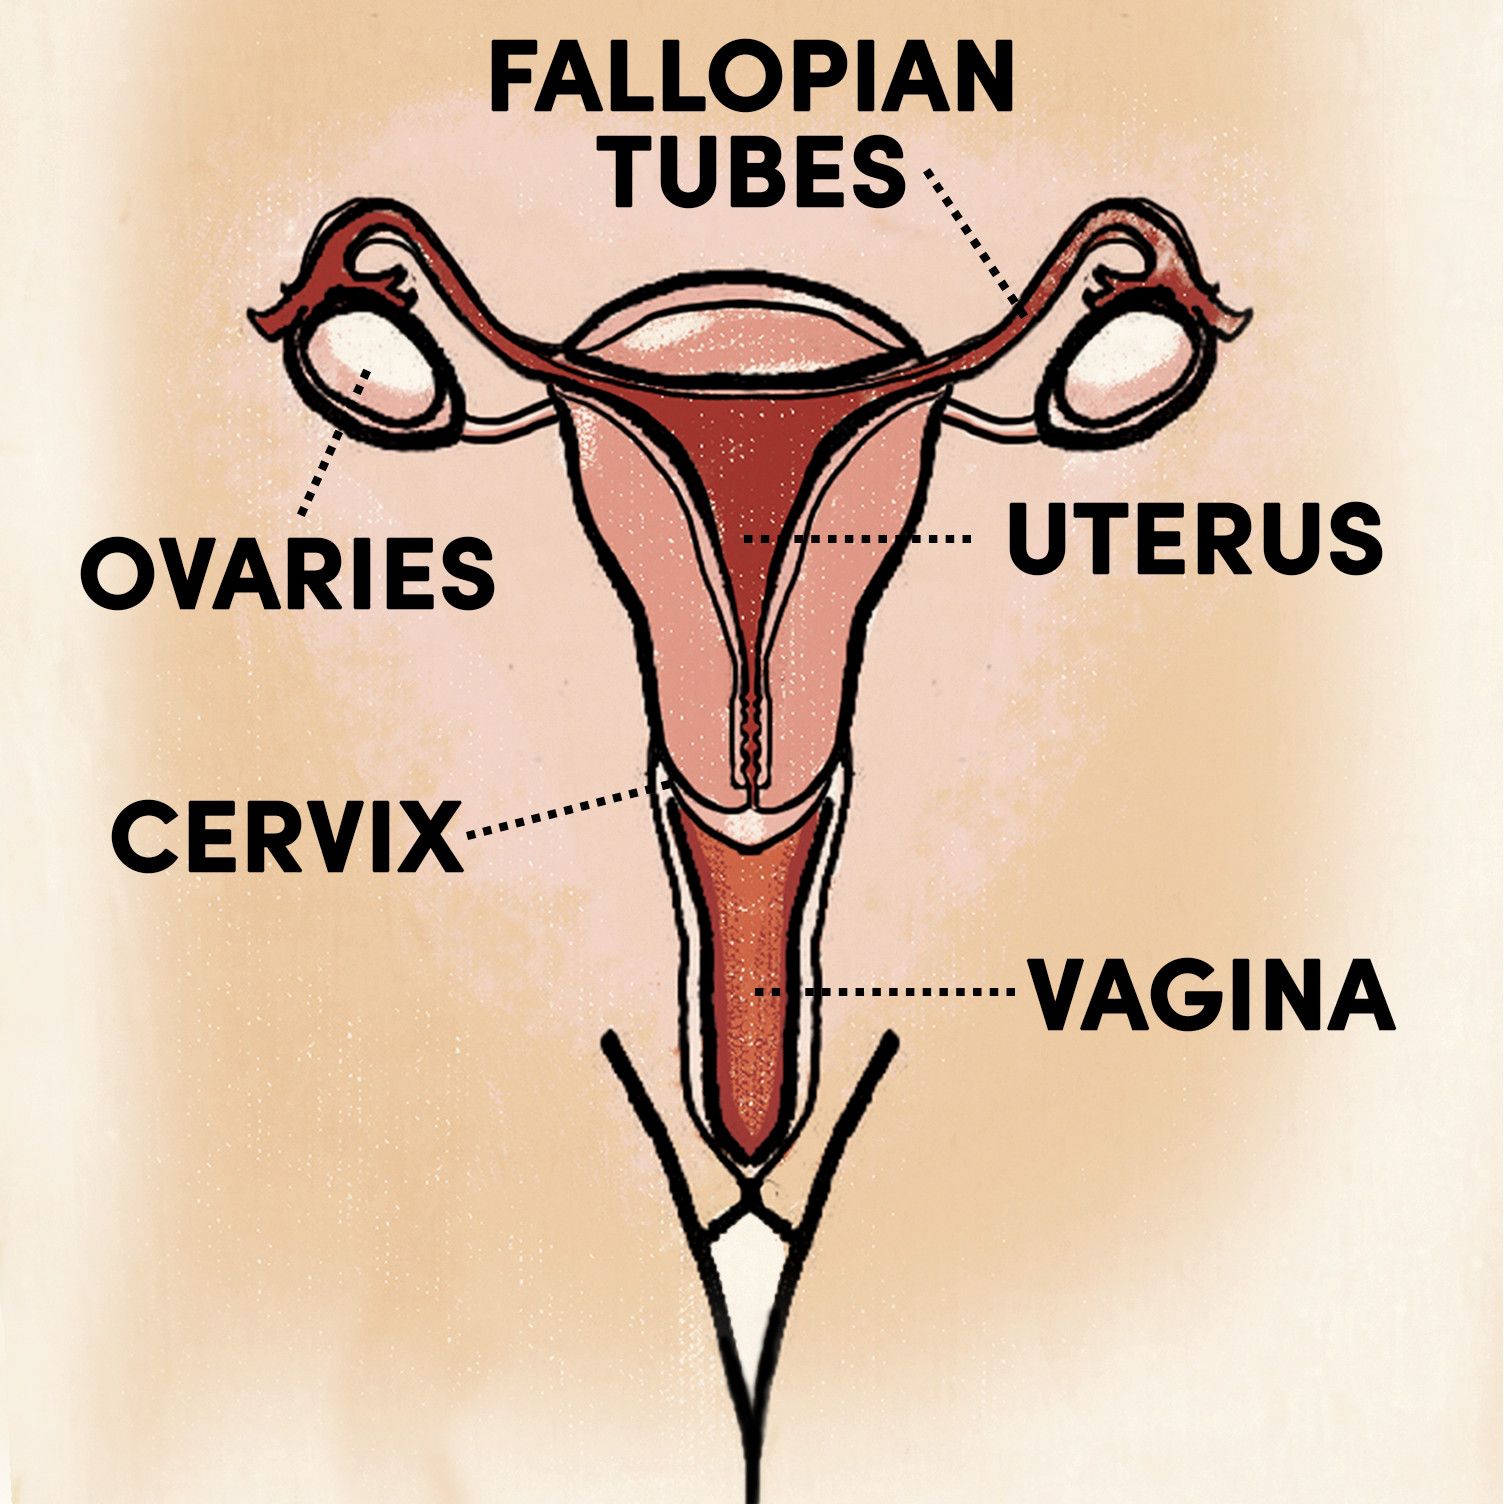 What The Inside Of Vagina Looks Like A Virgin